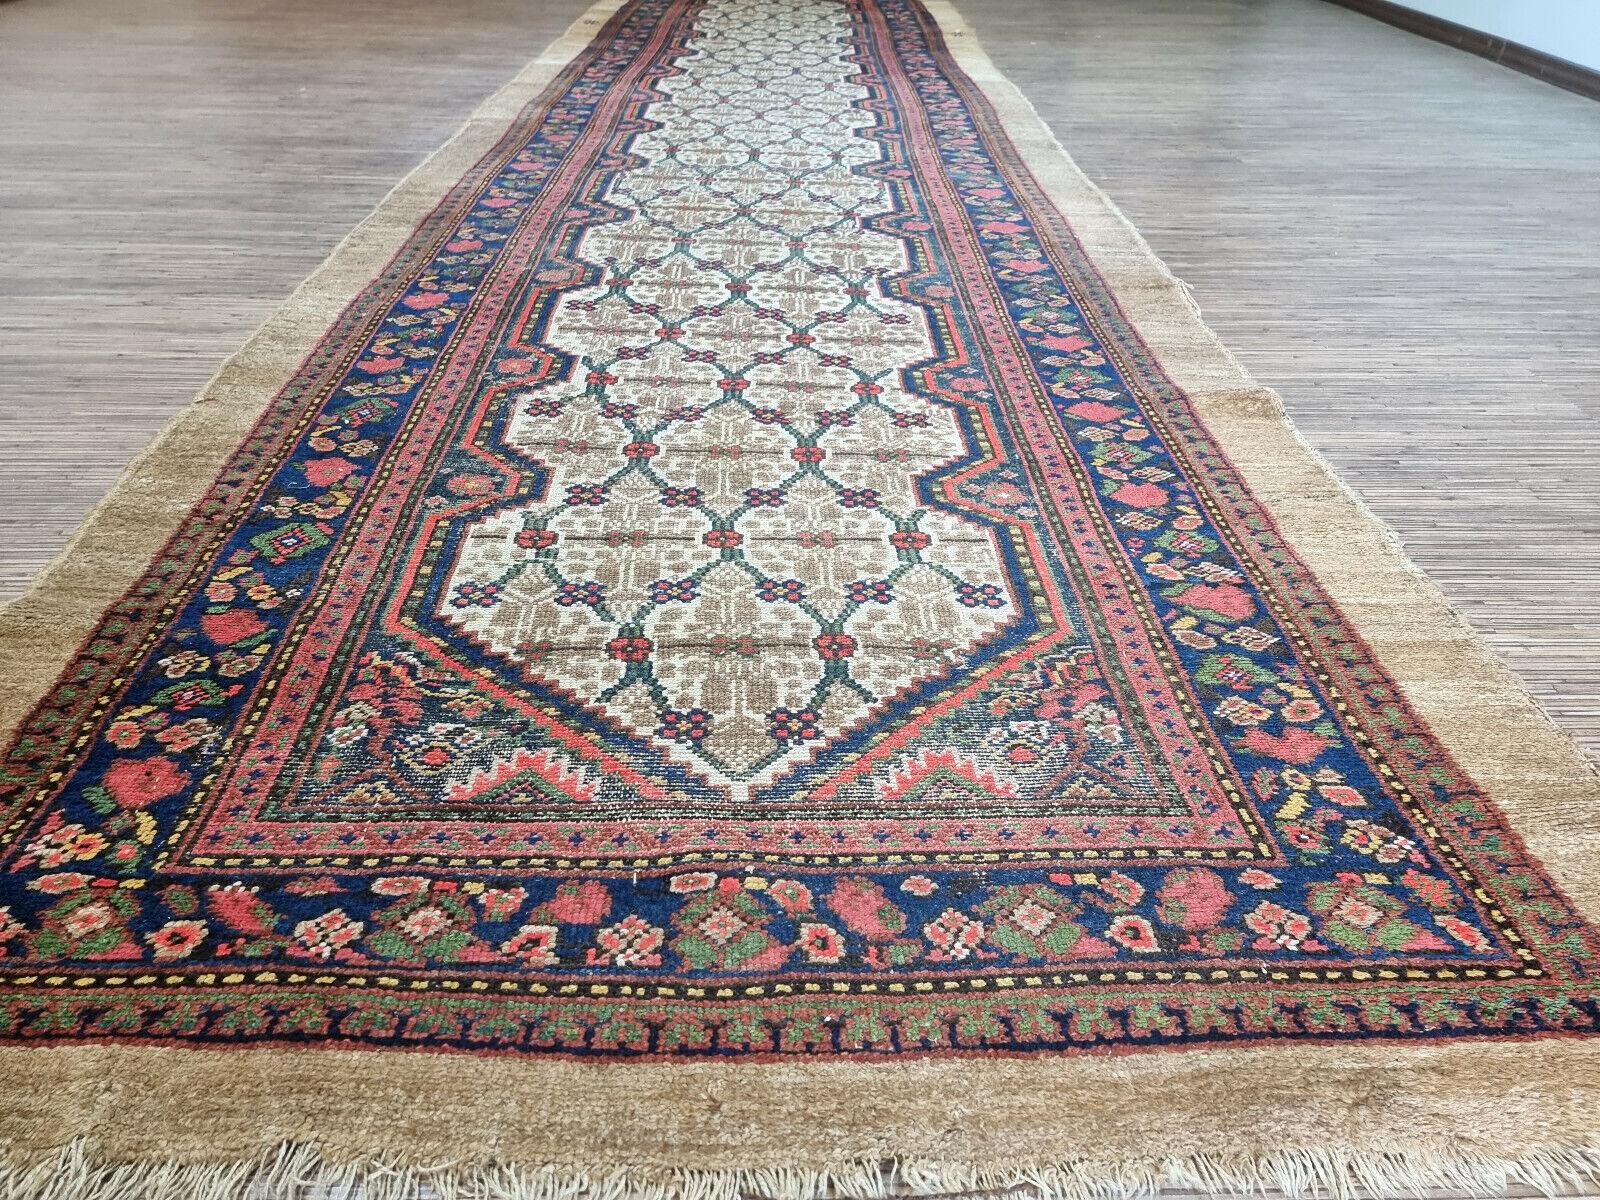 Hand-Knotted Handmade Antique Persian Style Camel Hair Runner Rug 4' x 14.4', 1900s - 1D79 For Sale